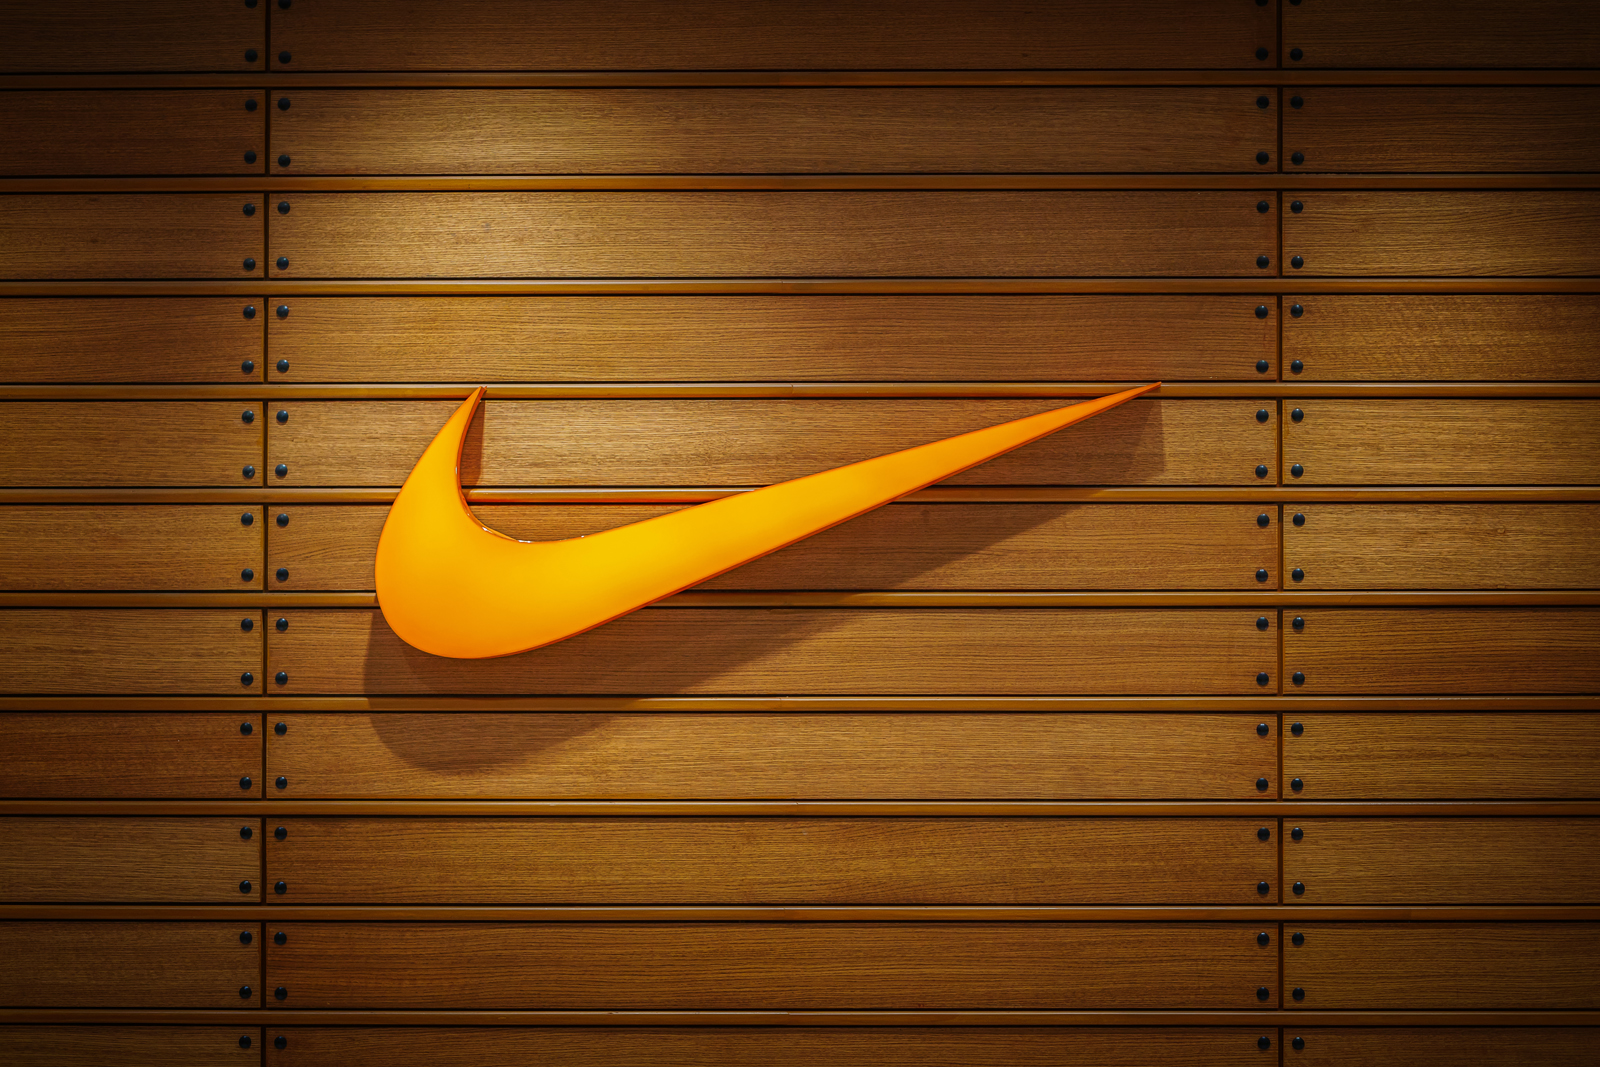 online nike stores